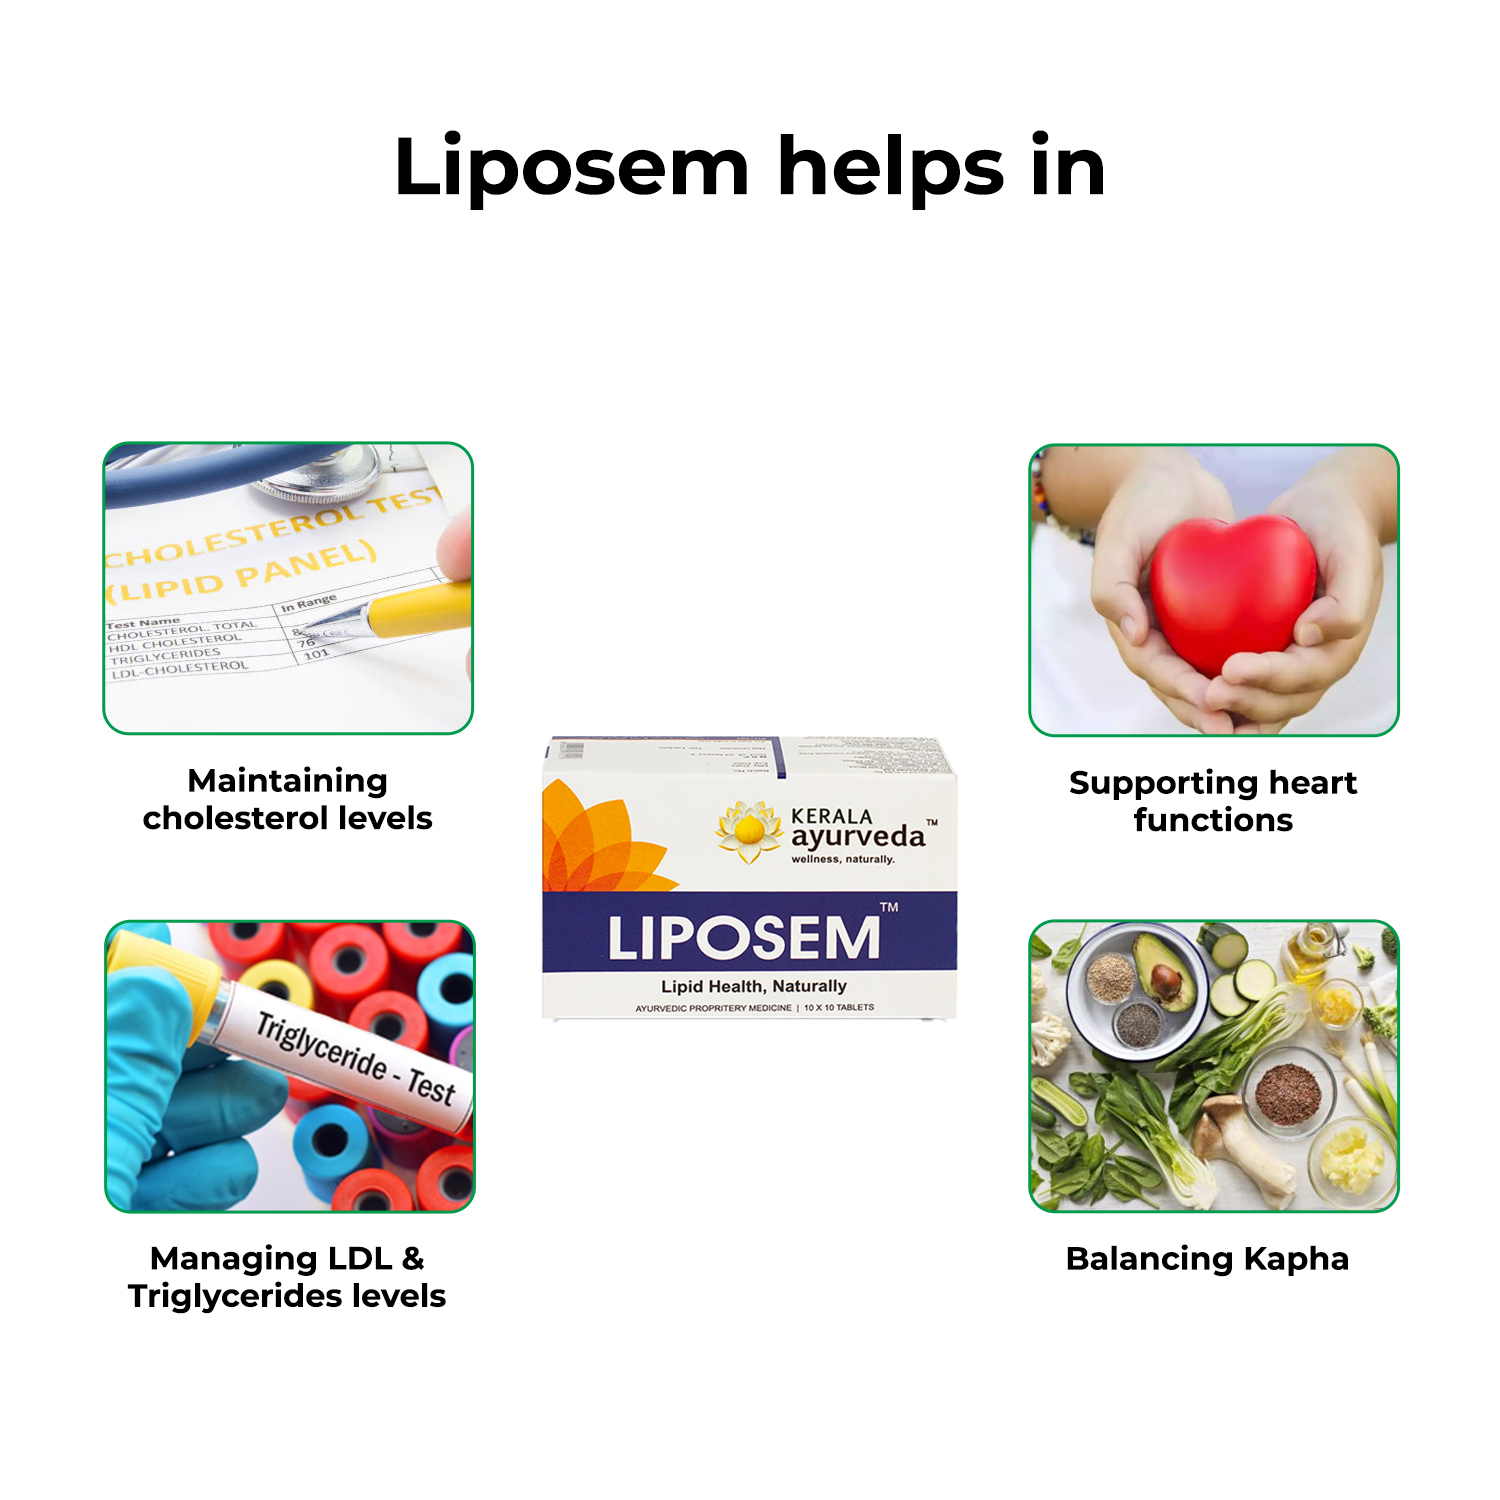 Benefits of Liposem Tablet for cholesterol and triglycerides